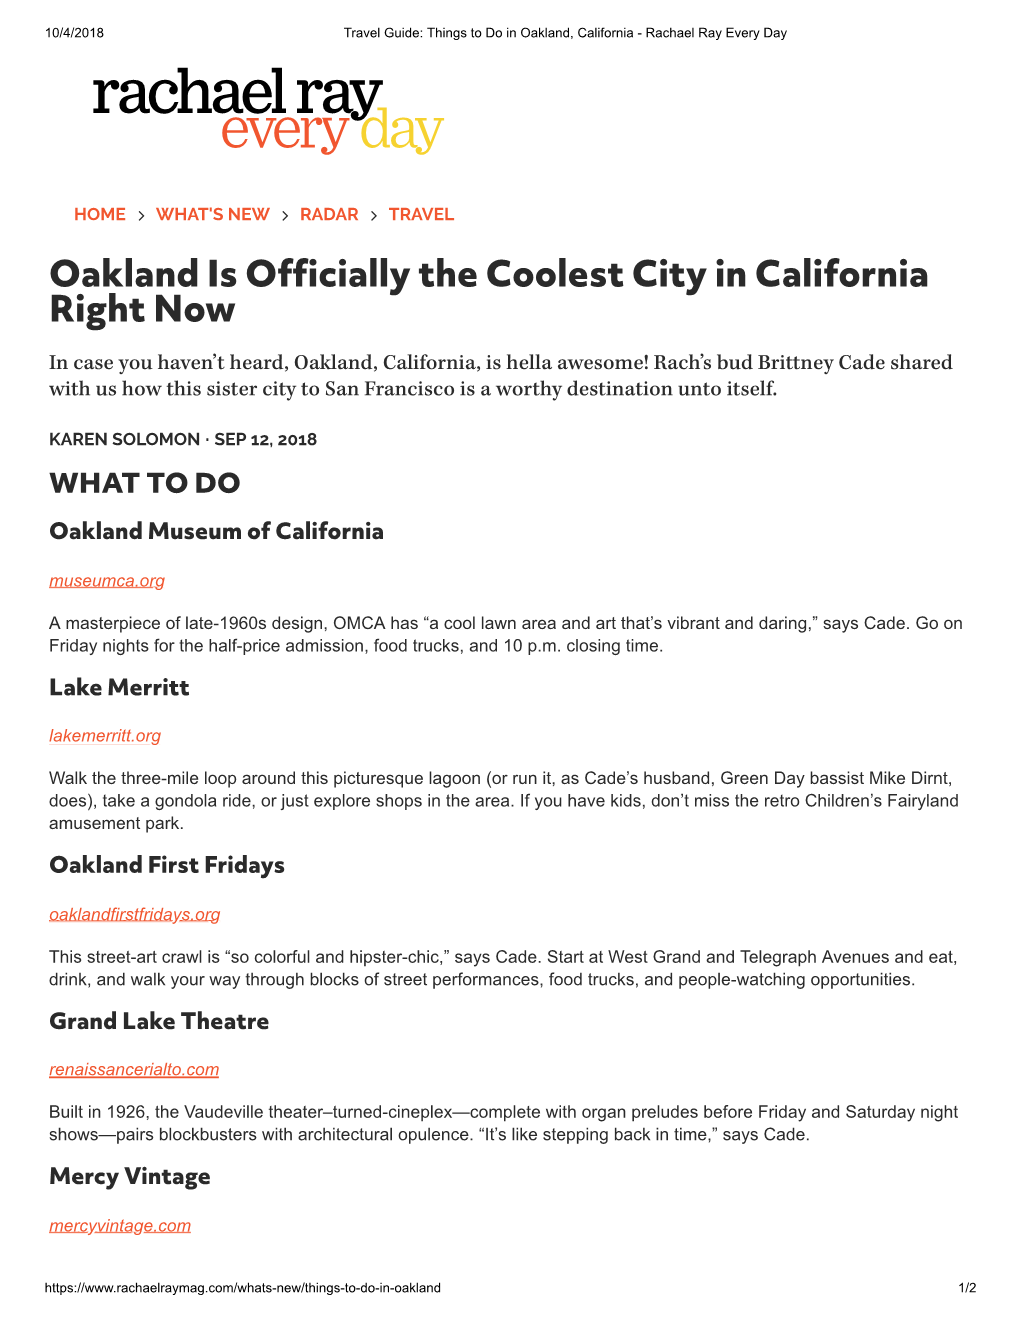 Oakland Is Officially the Coolest City in California Right Now